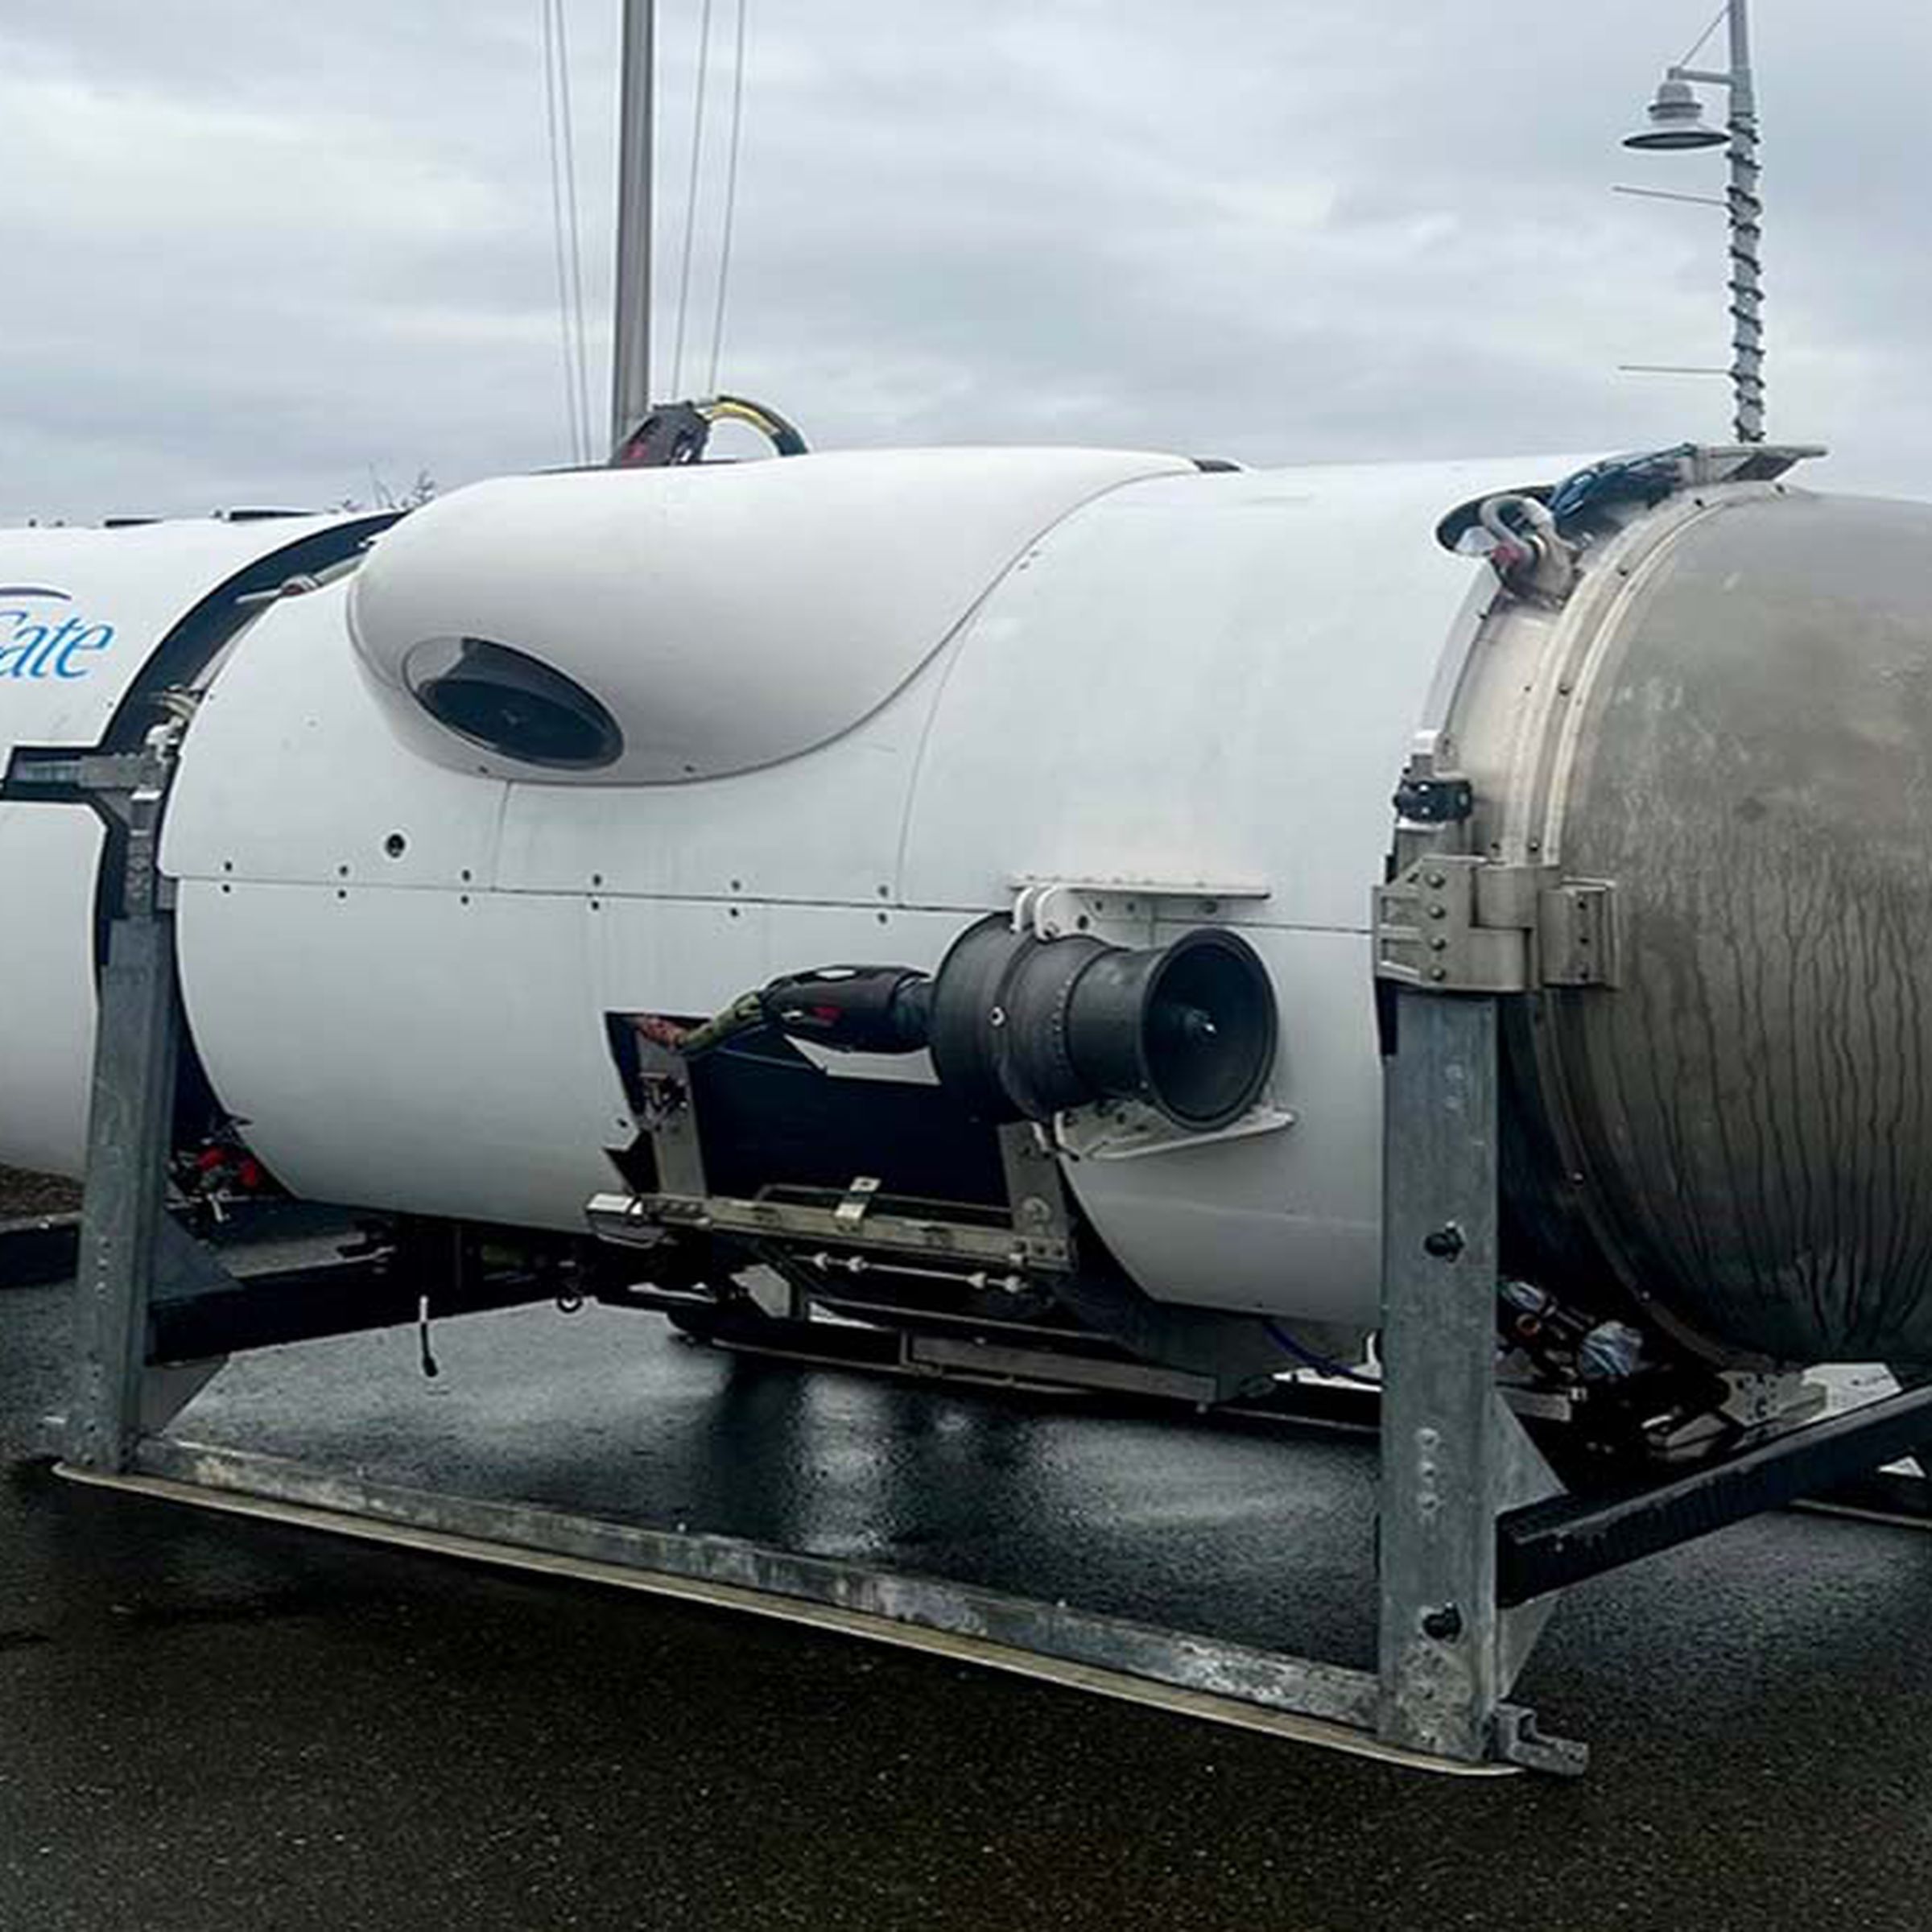 An image showing the Titan submersible